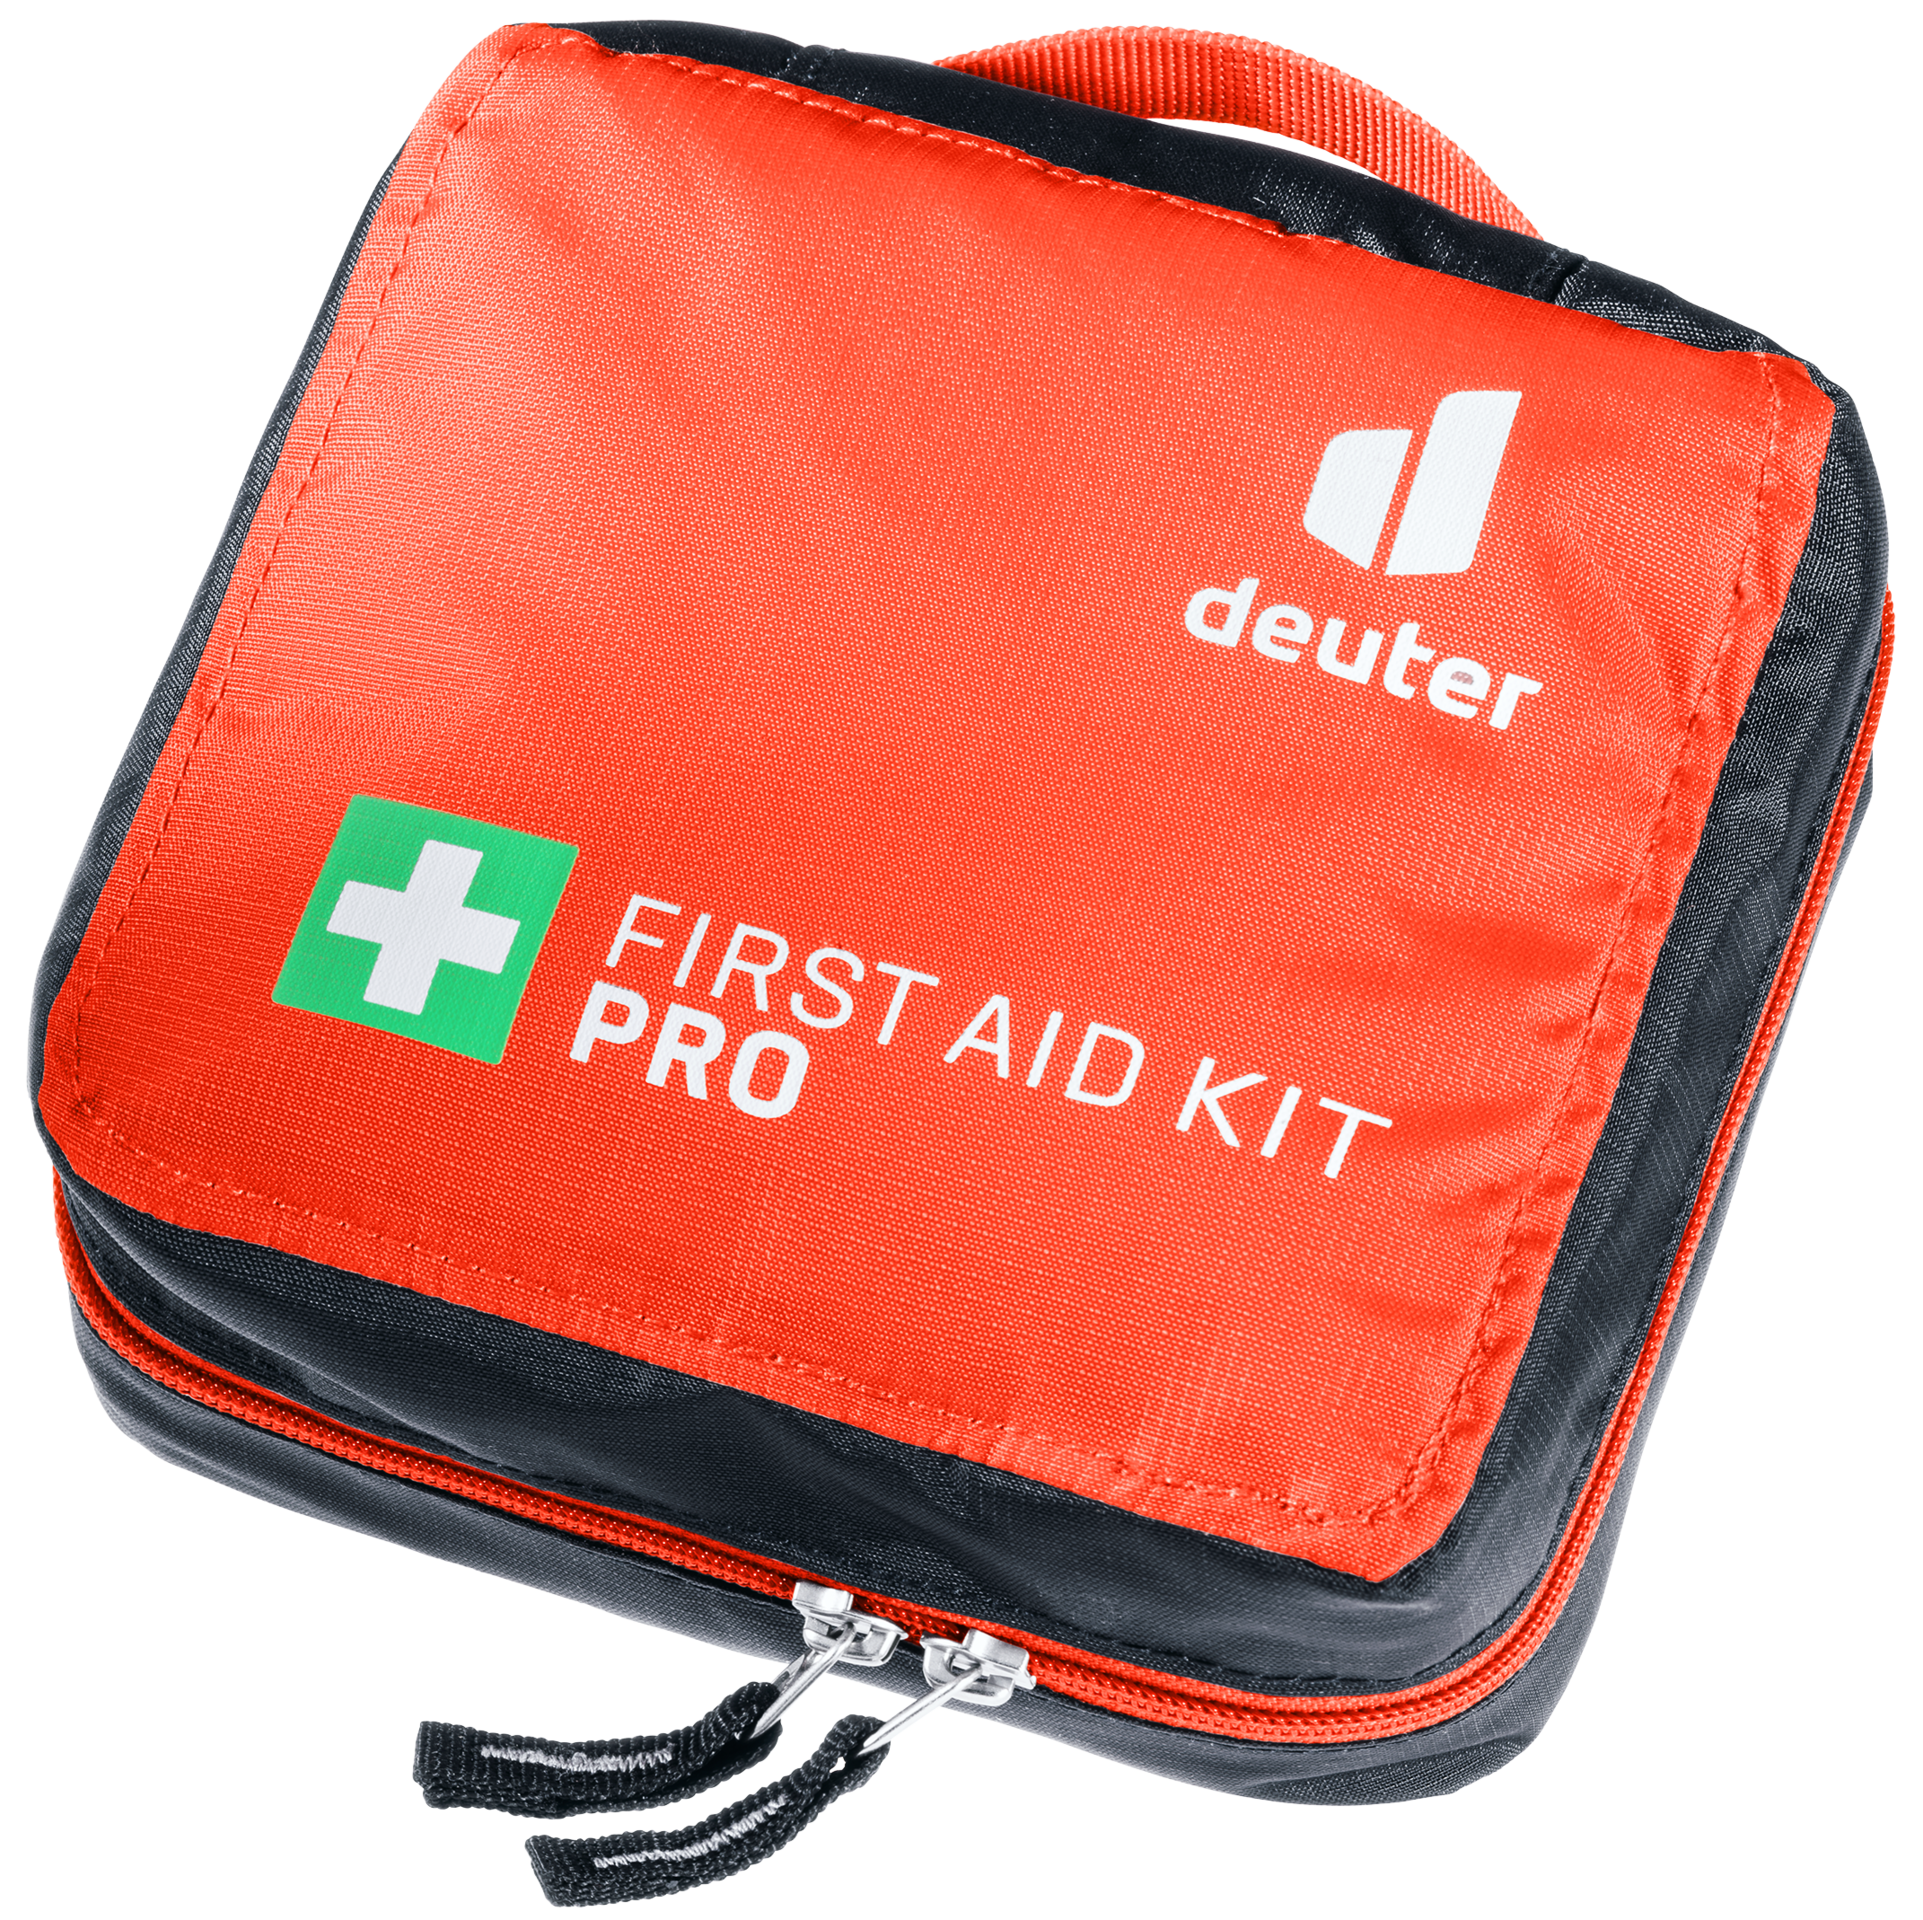 https://dk0fkjygbn9vu.cloudfront.net/cache-buster-11706829749/deuter/mediaroom/product-images/accessories/first-aid-kits/140334/image-thumb__140334__deuter_lightbox-img/3970223-9002-FirstAidKitPro_papaya-D-00.png